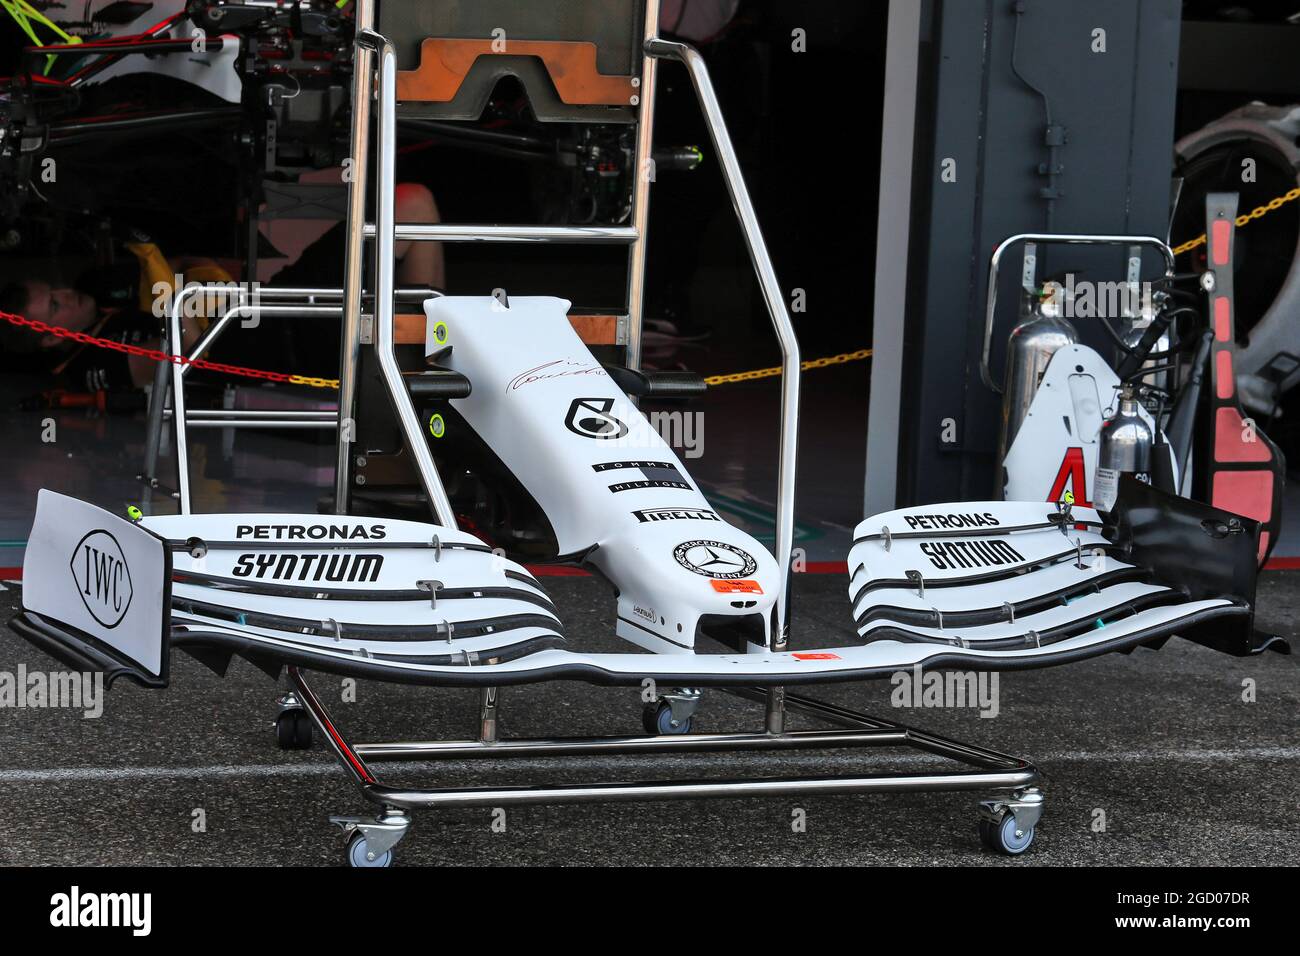 Mercedes AMG F1 W10 front wing with special livery. German Grand Prix, Thursday 25th July 2019. Hockenheim, Germany. Stock Photo